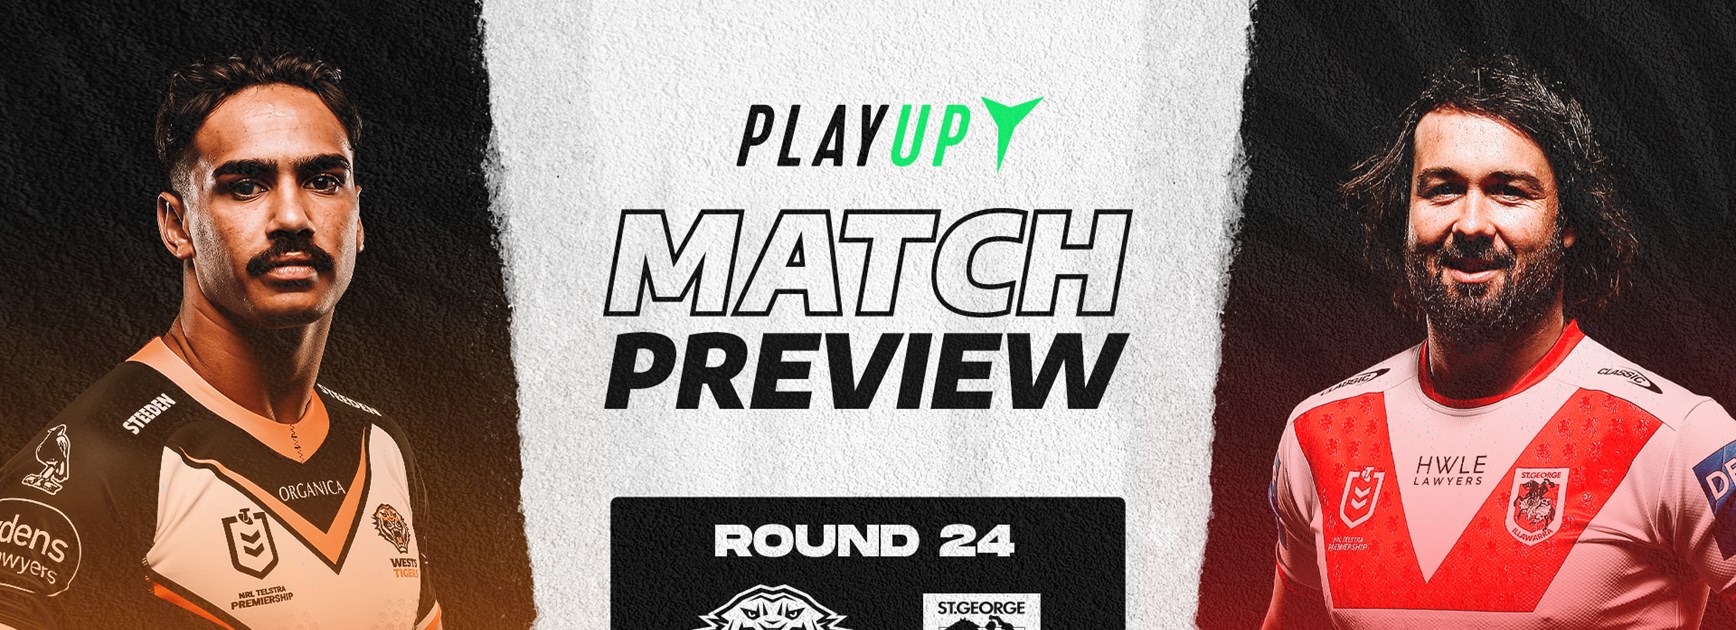 Match Preview: Round 24 vs St George Illawarra Dragons